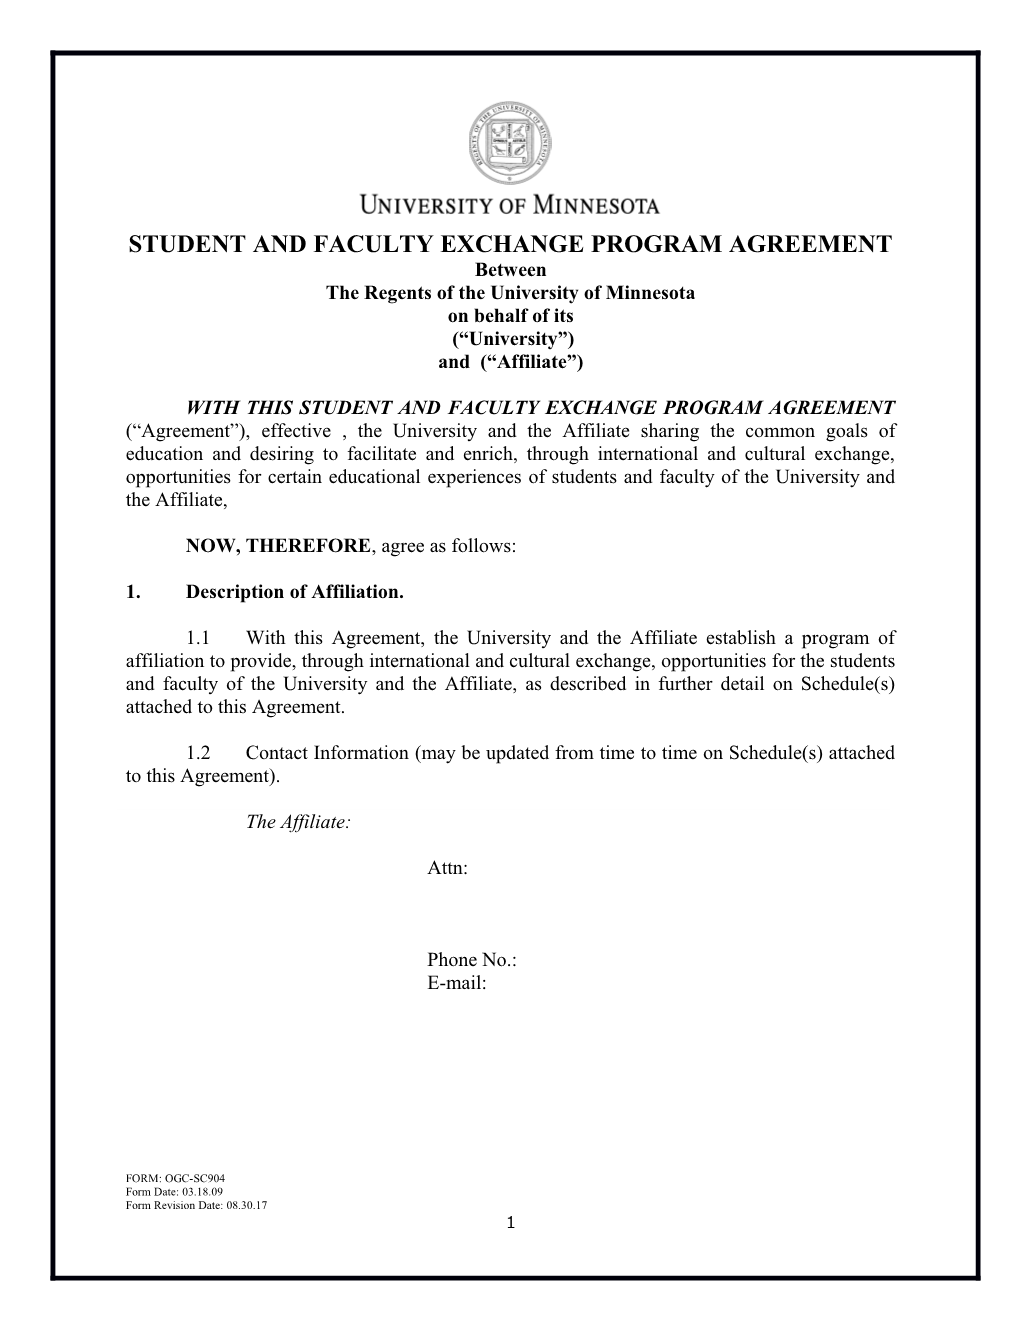 Student and Faculty Exchange Program Agreement